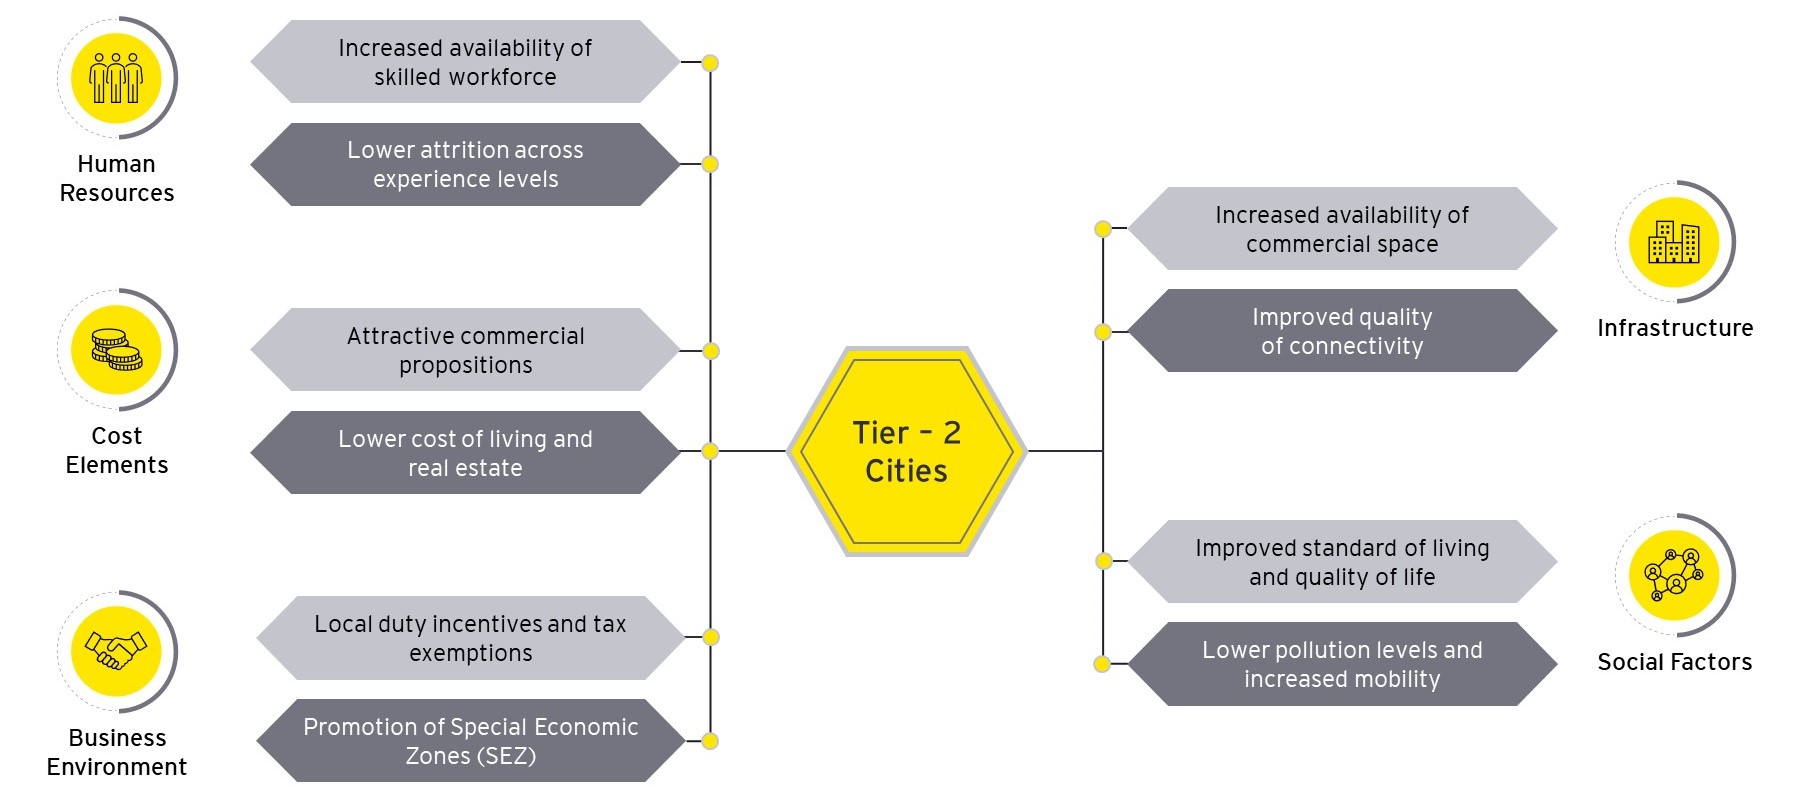 Key factors for the growth of Tier-2 locations